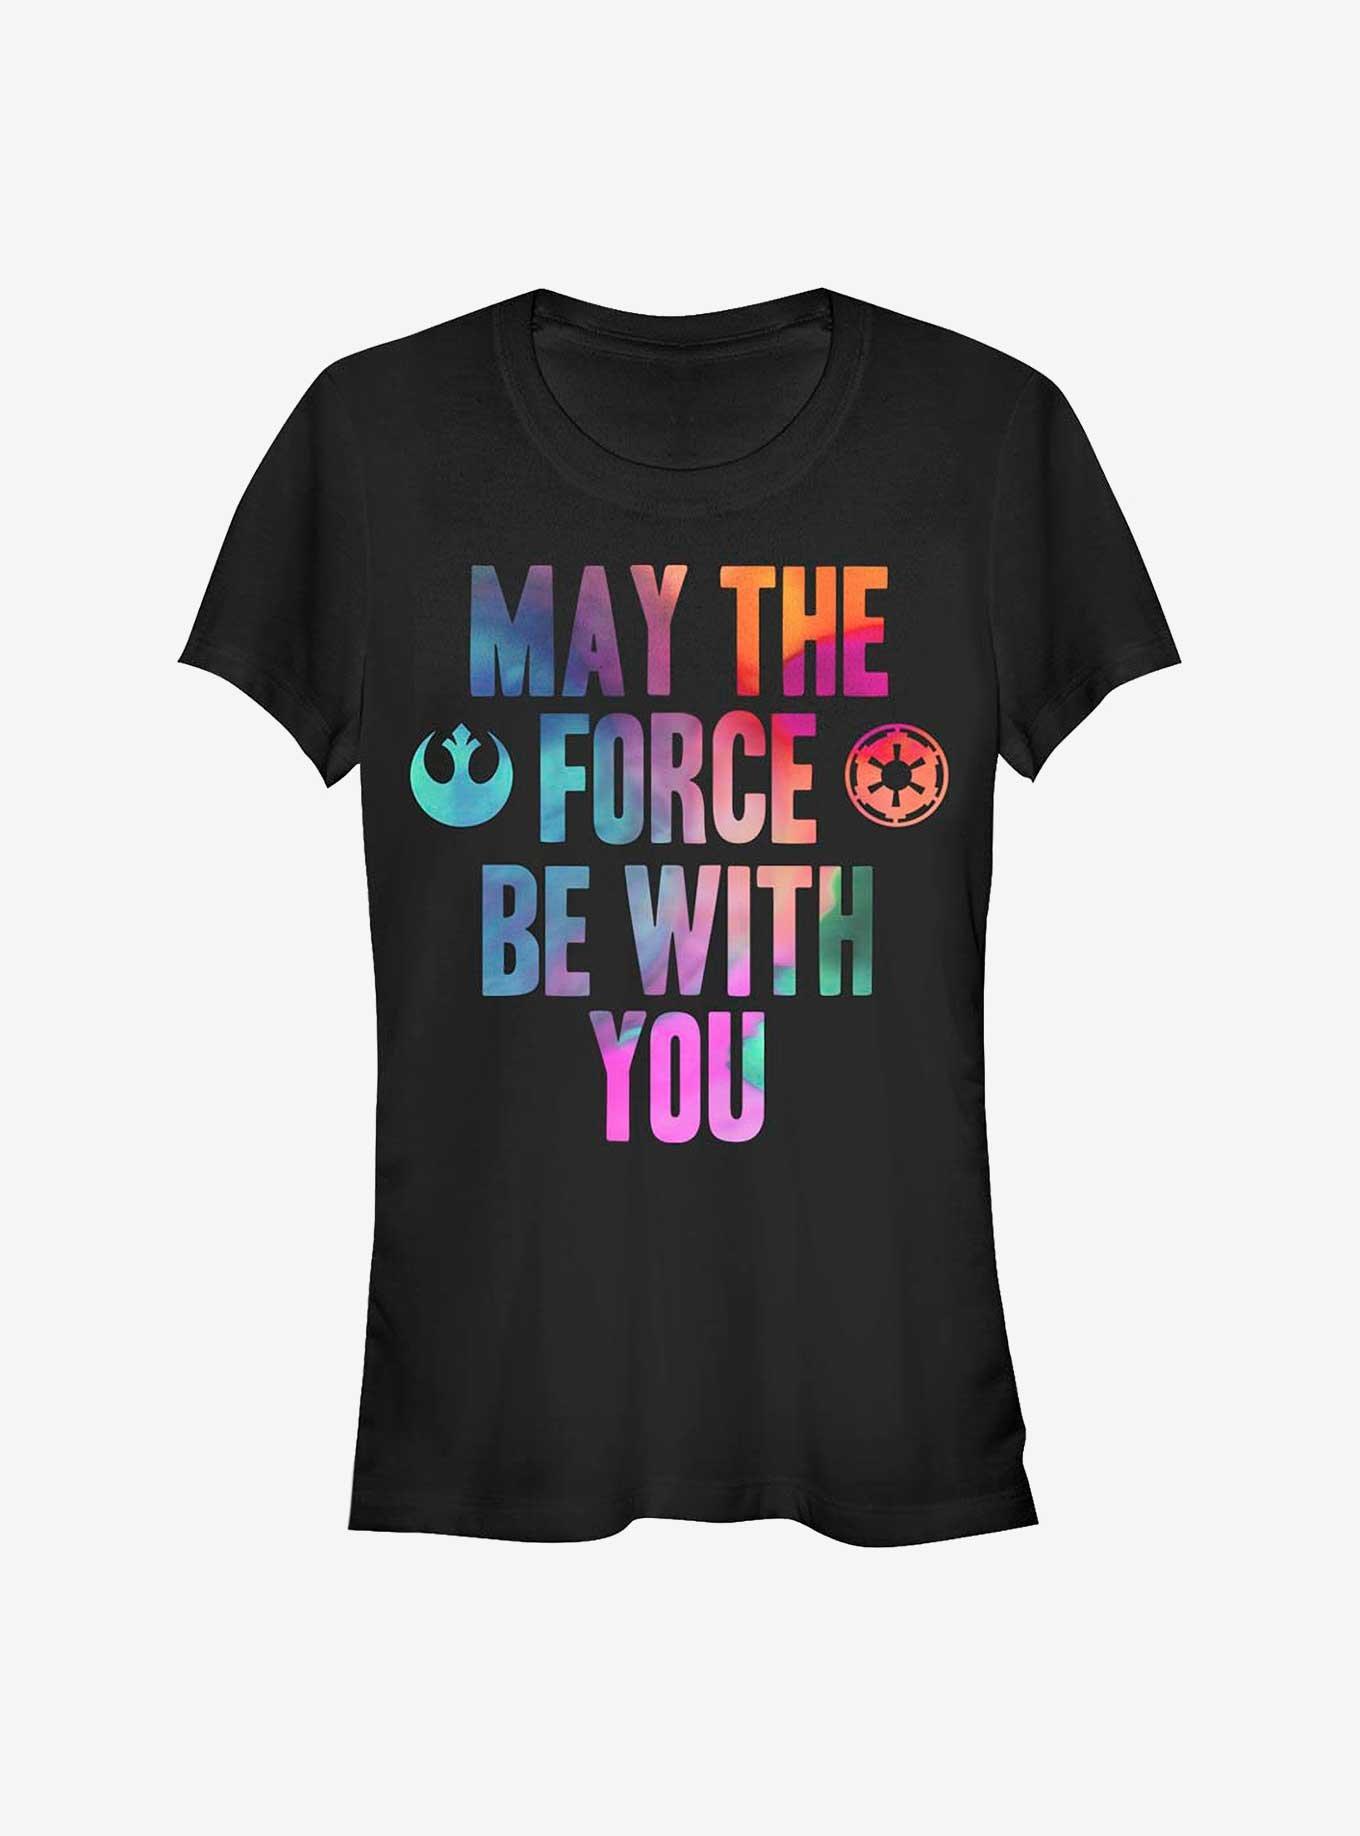 Star Wars May The Force Be With You Colors Girls T-Shirt, BLACK, hi-res